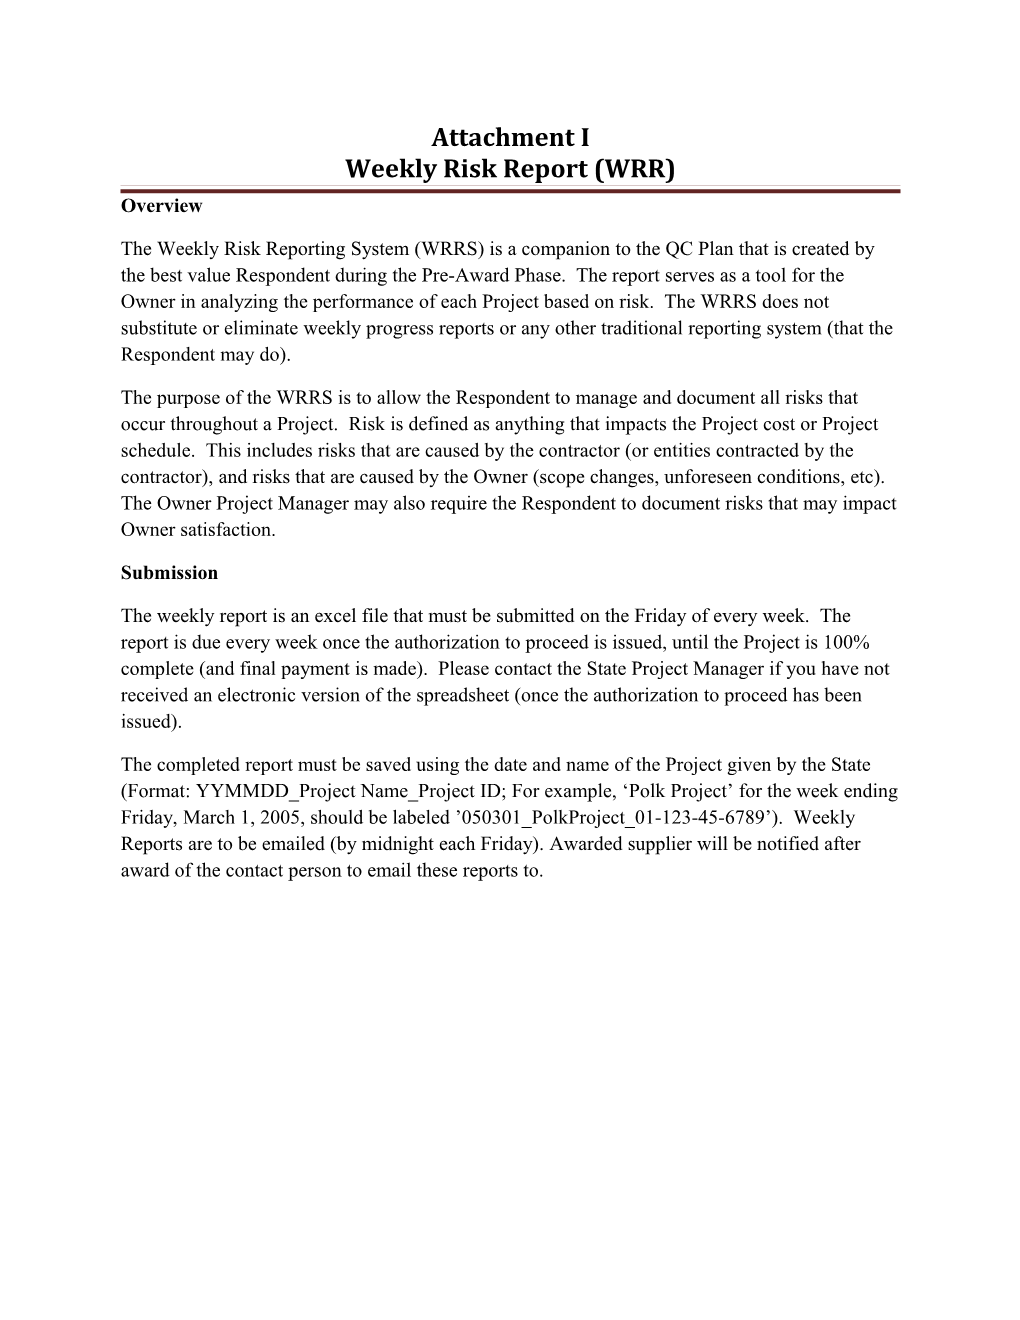 Weekly Risk Report (WRR)